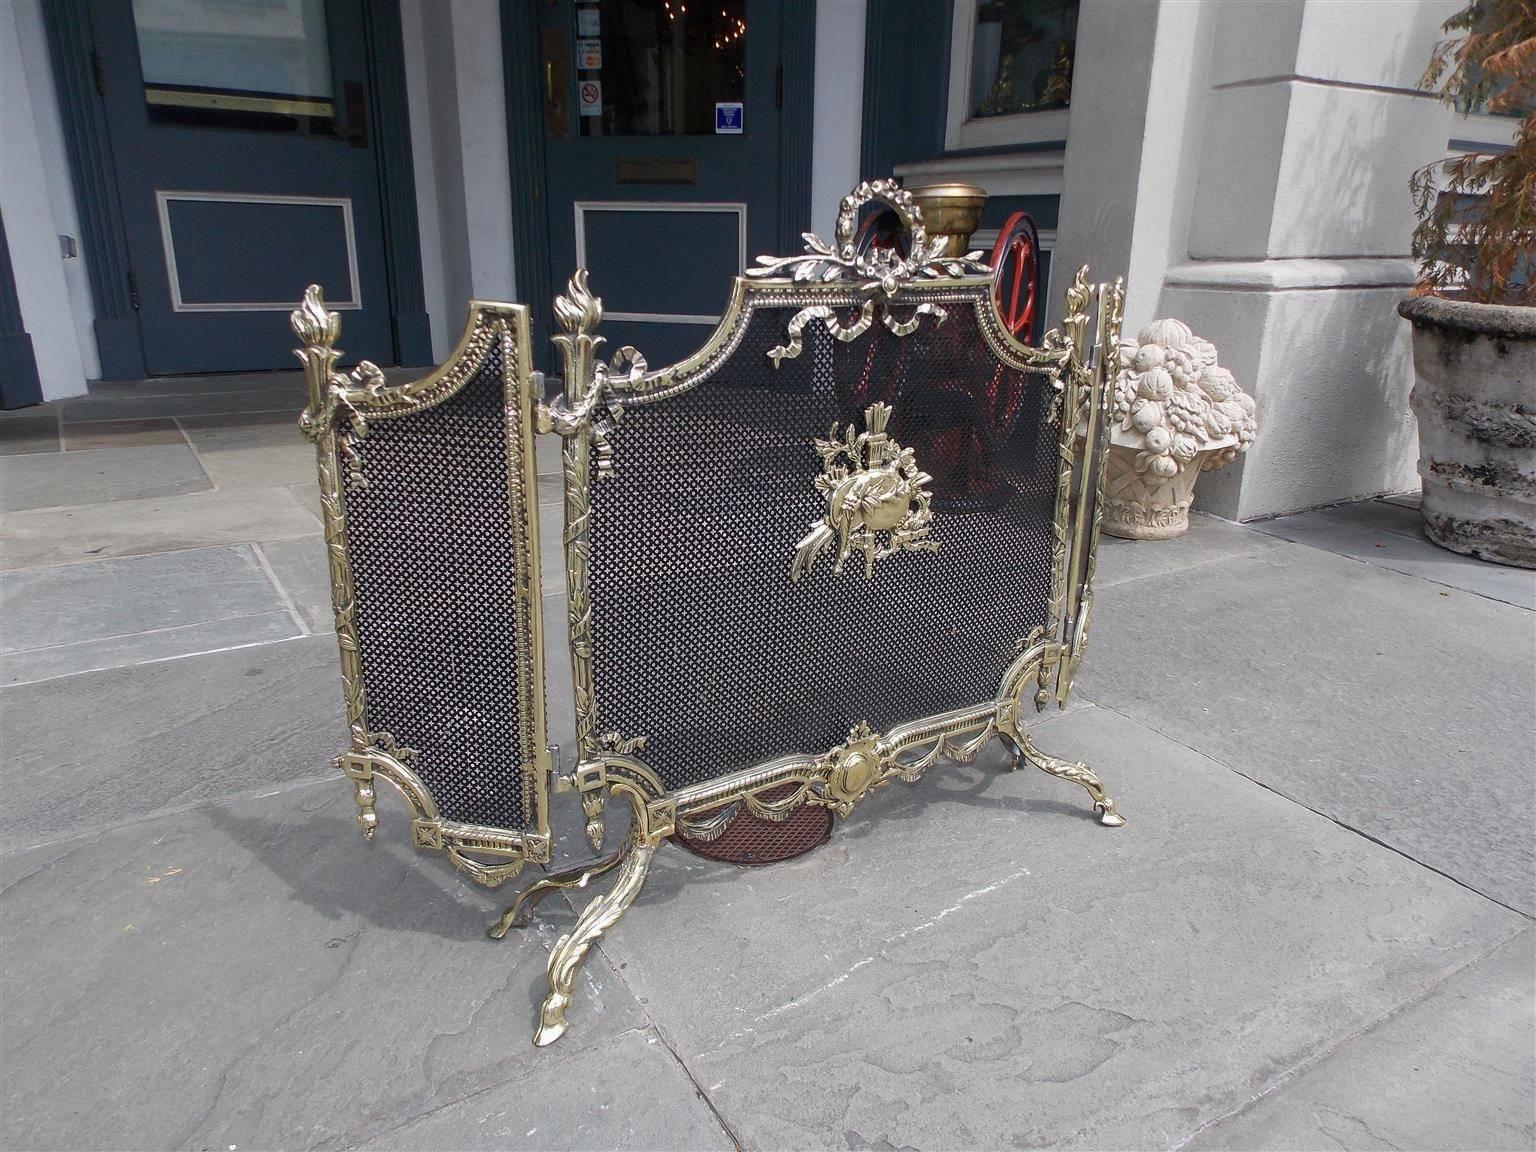 French brass folding fire screen with a decorative laurel wreath ribbon handle, flanking flame corner finials, centered arrow medallion, lower ornate medallion with swag motif, and terminating on acanthus scrolled hoof feet, Early 19th Century.